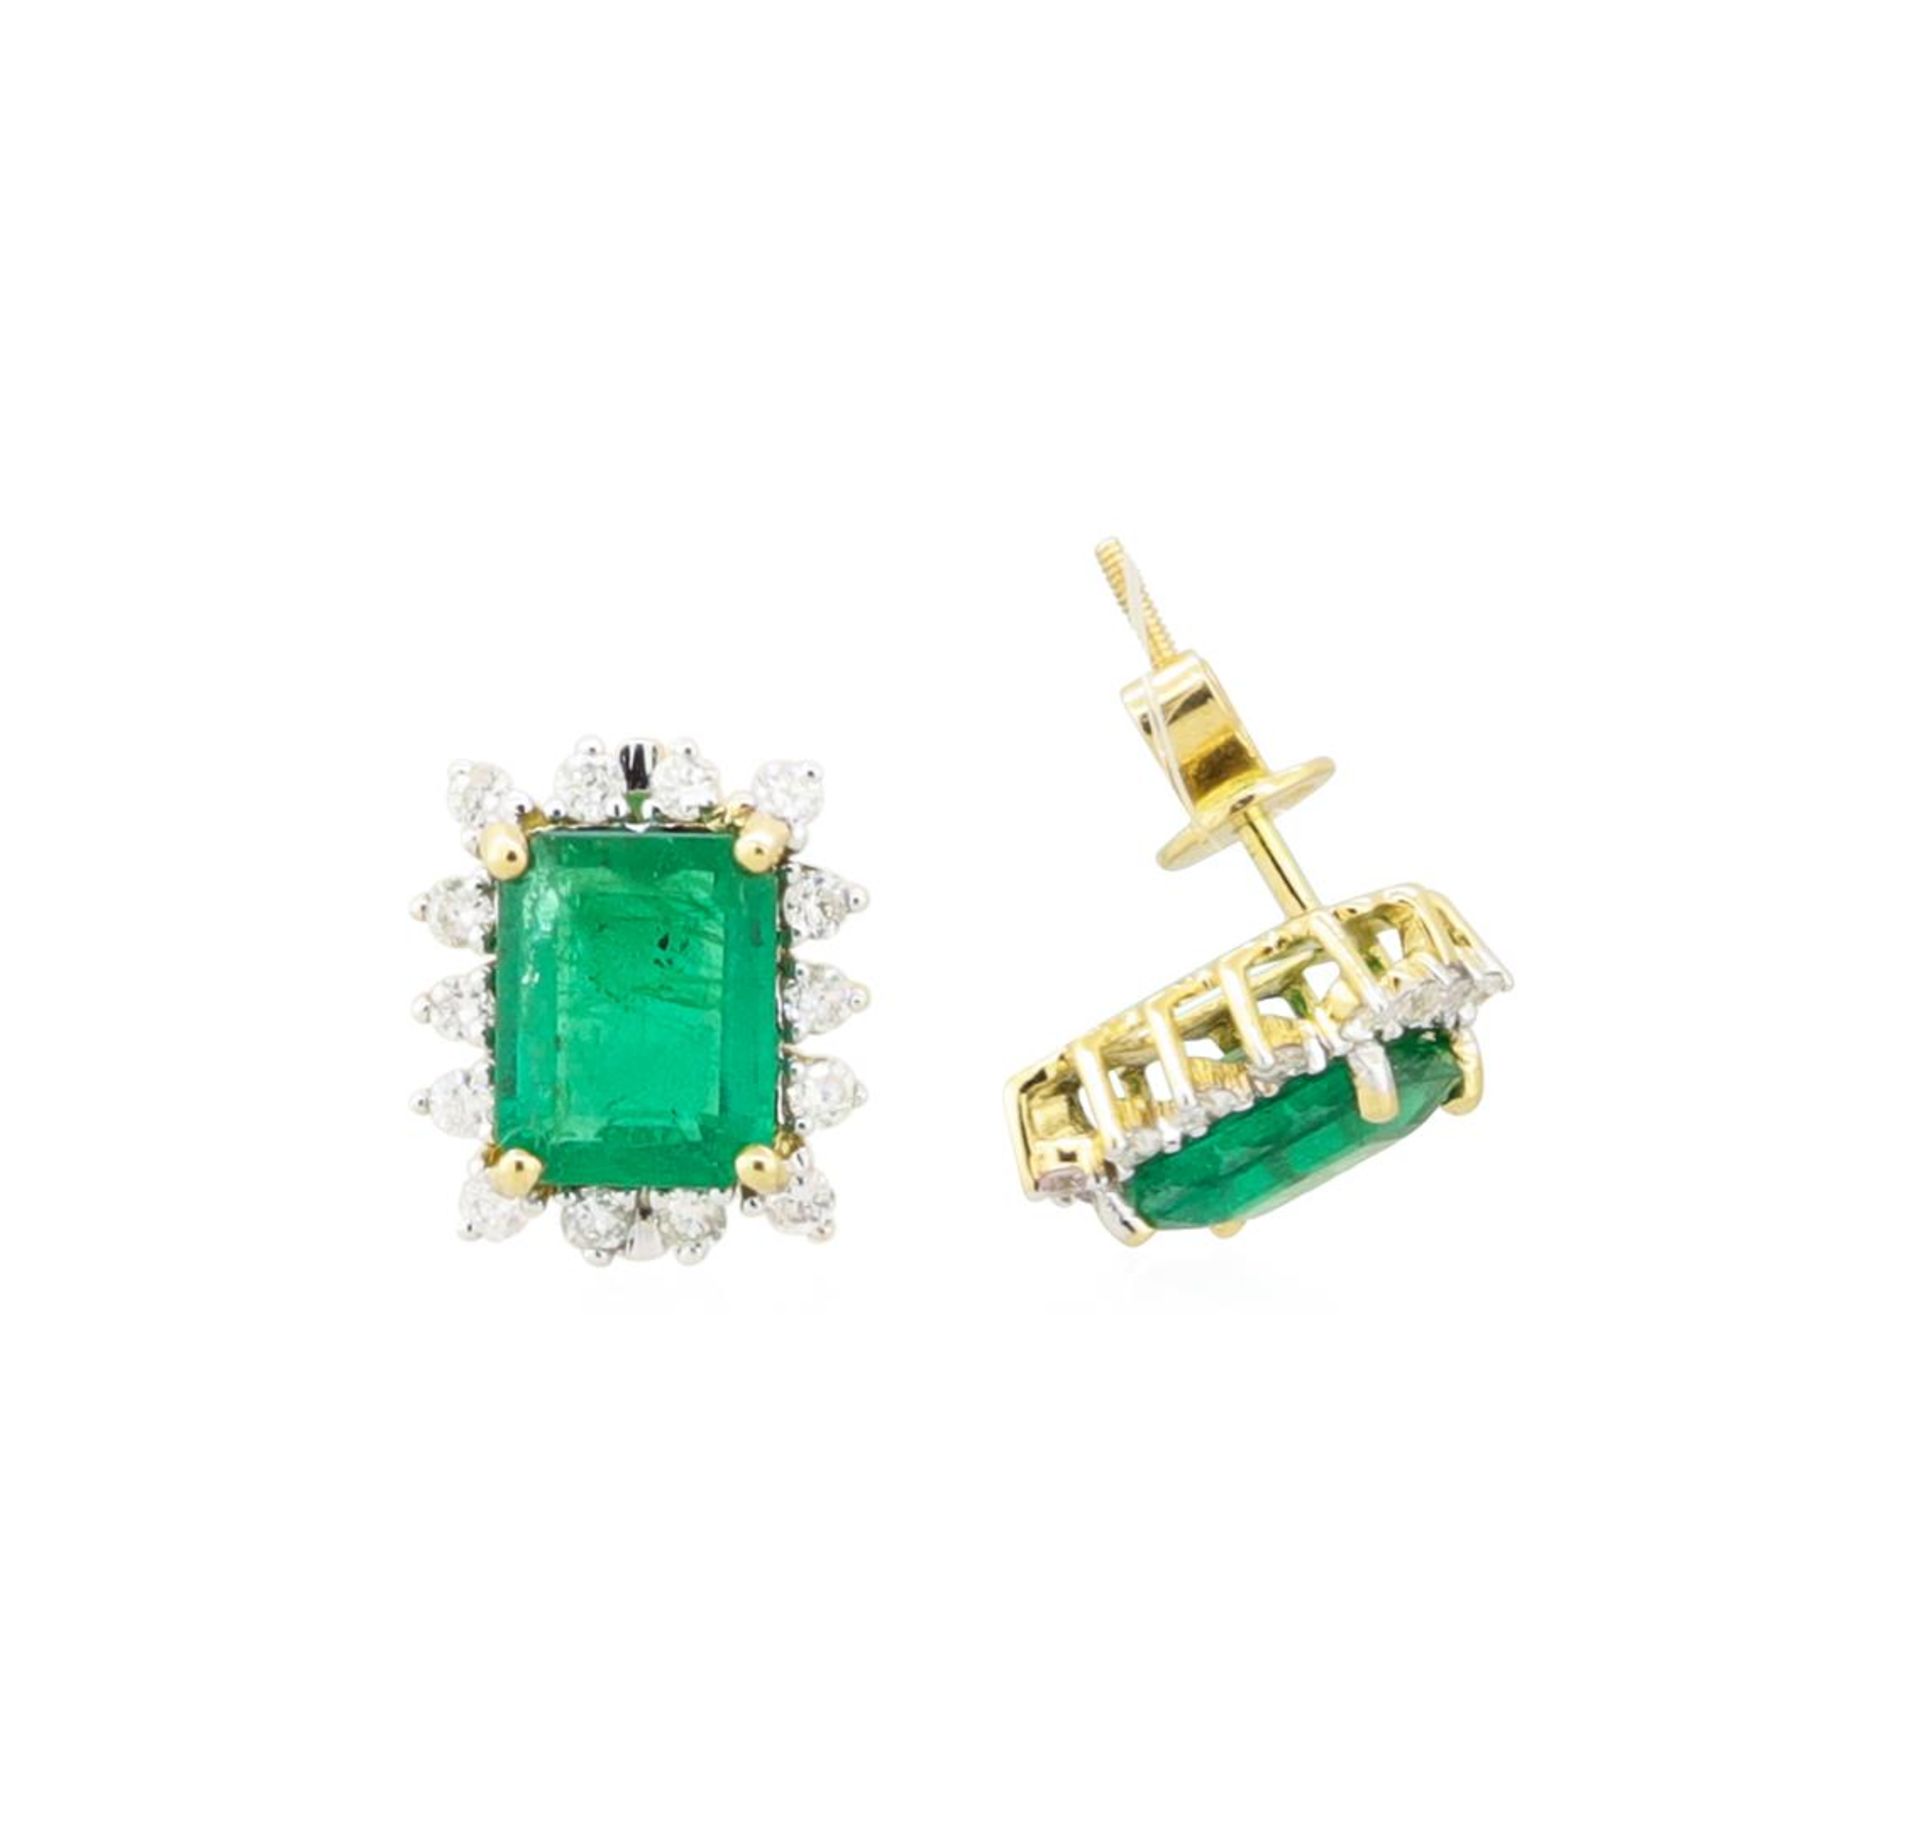 4.18 ctw Emerald and Diamond Earrings - 18KT Yellow Gold - Image 2 of 2